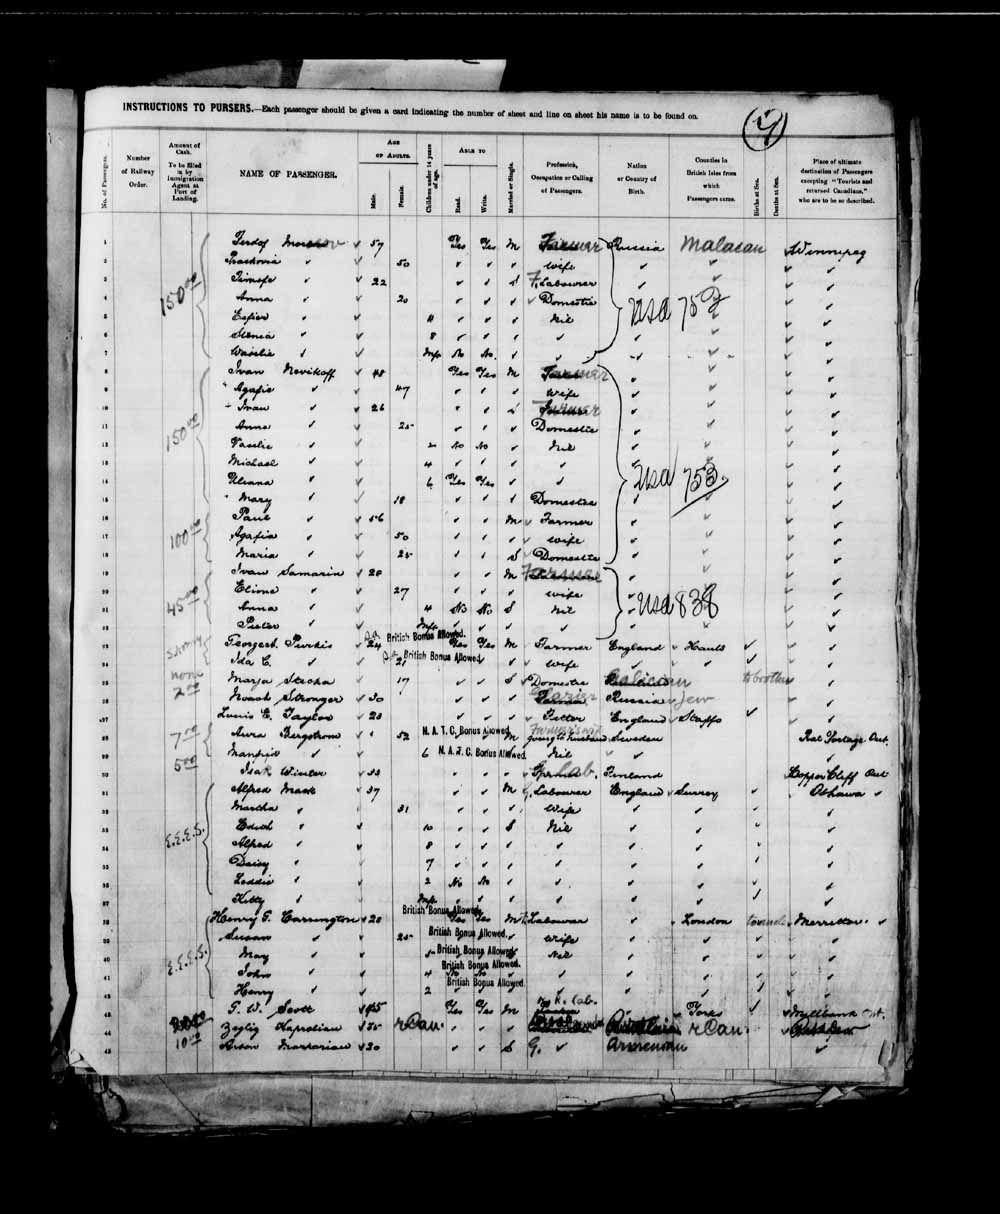 Digitized page of Passenger Lists for Image No.: e003658079